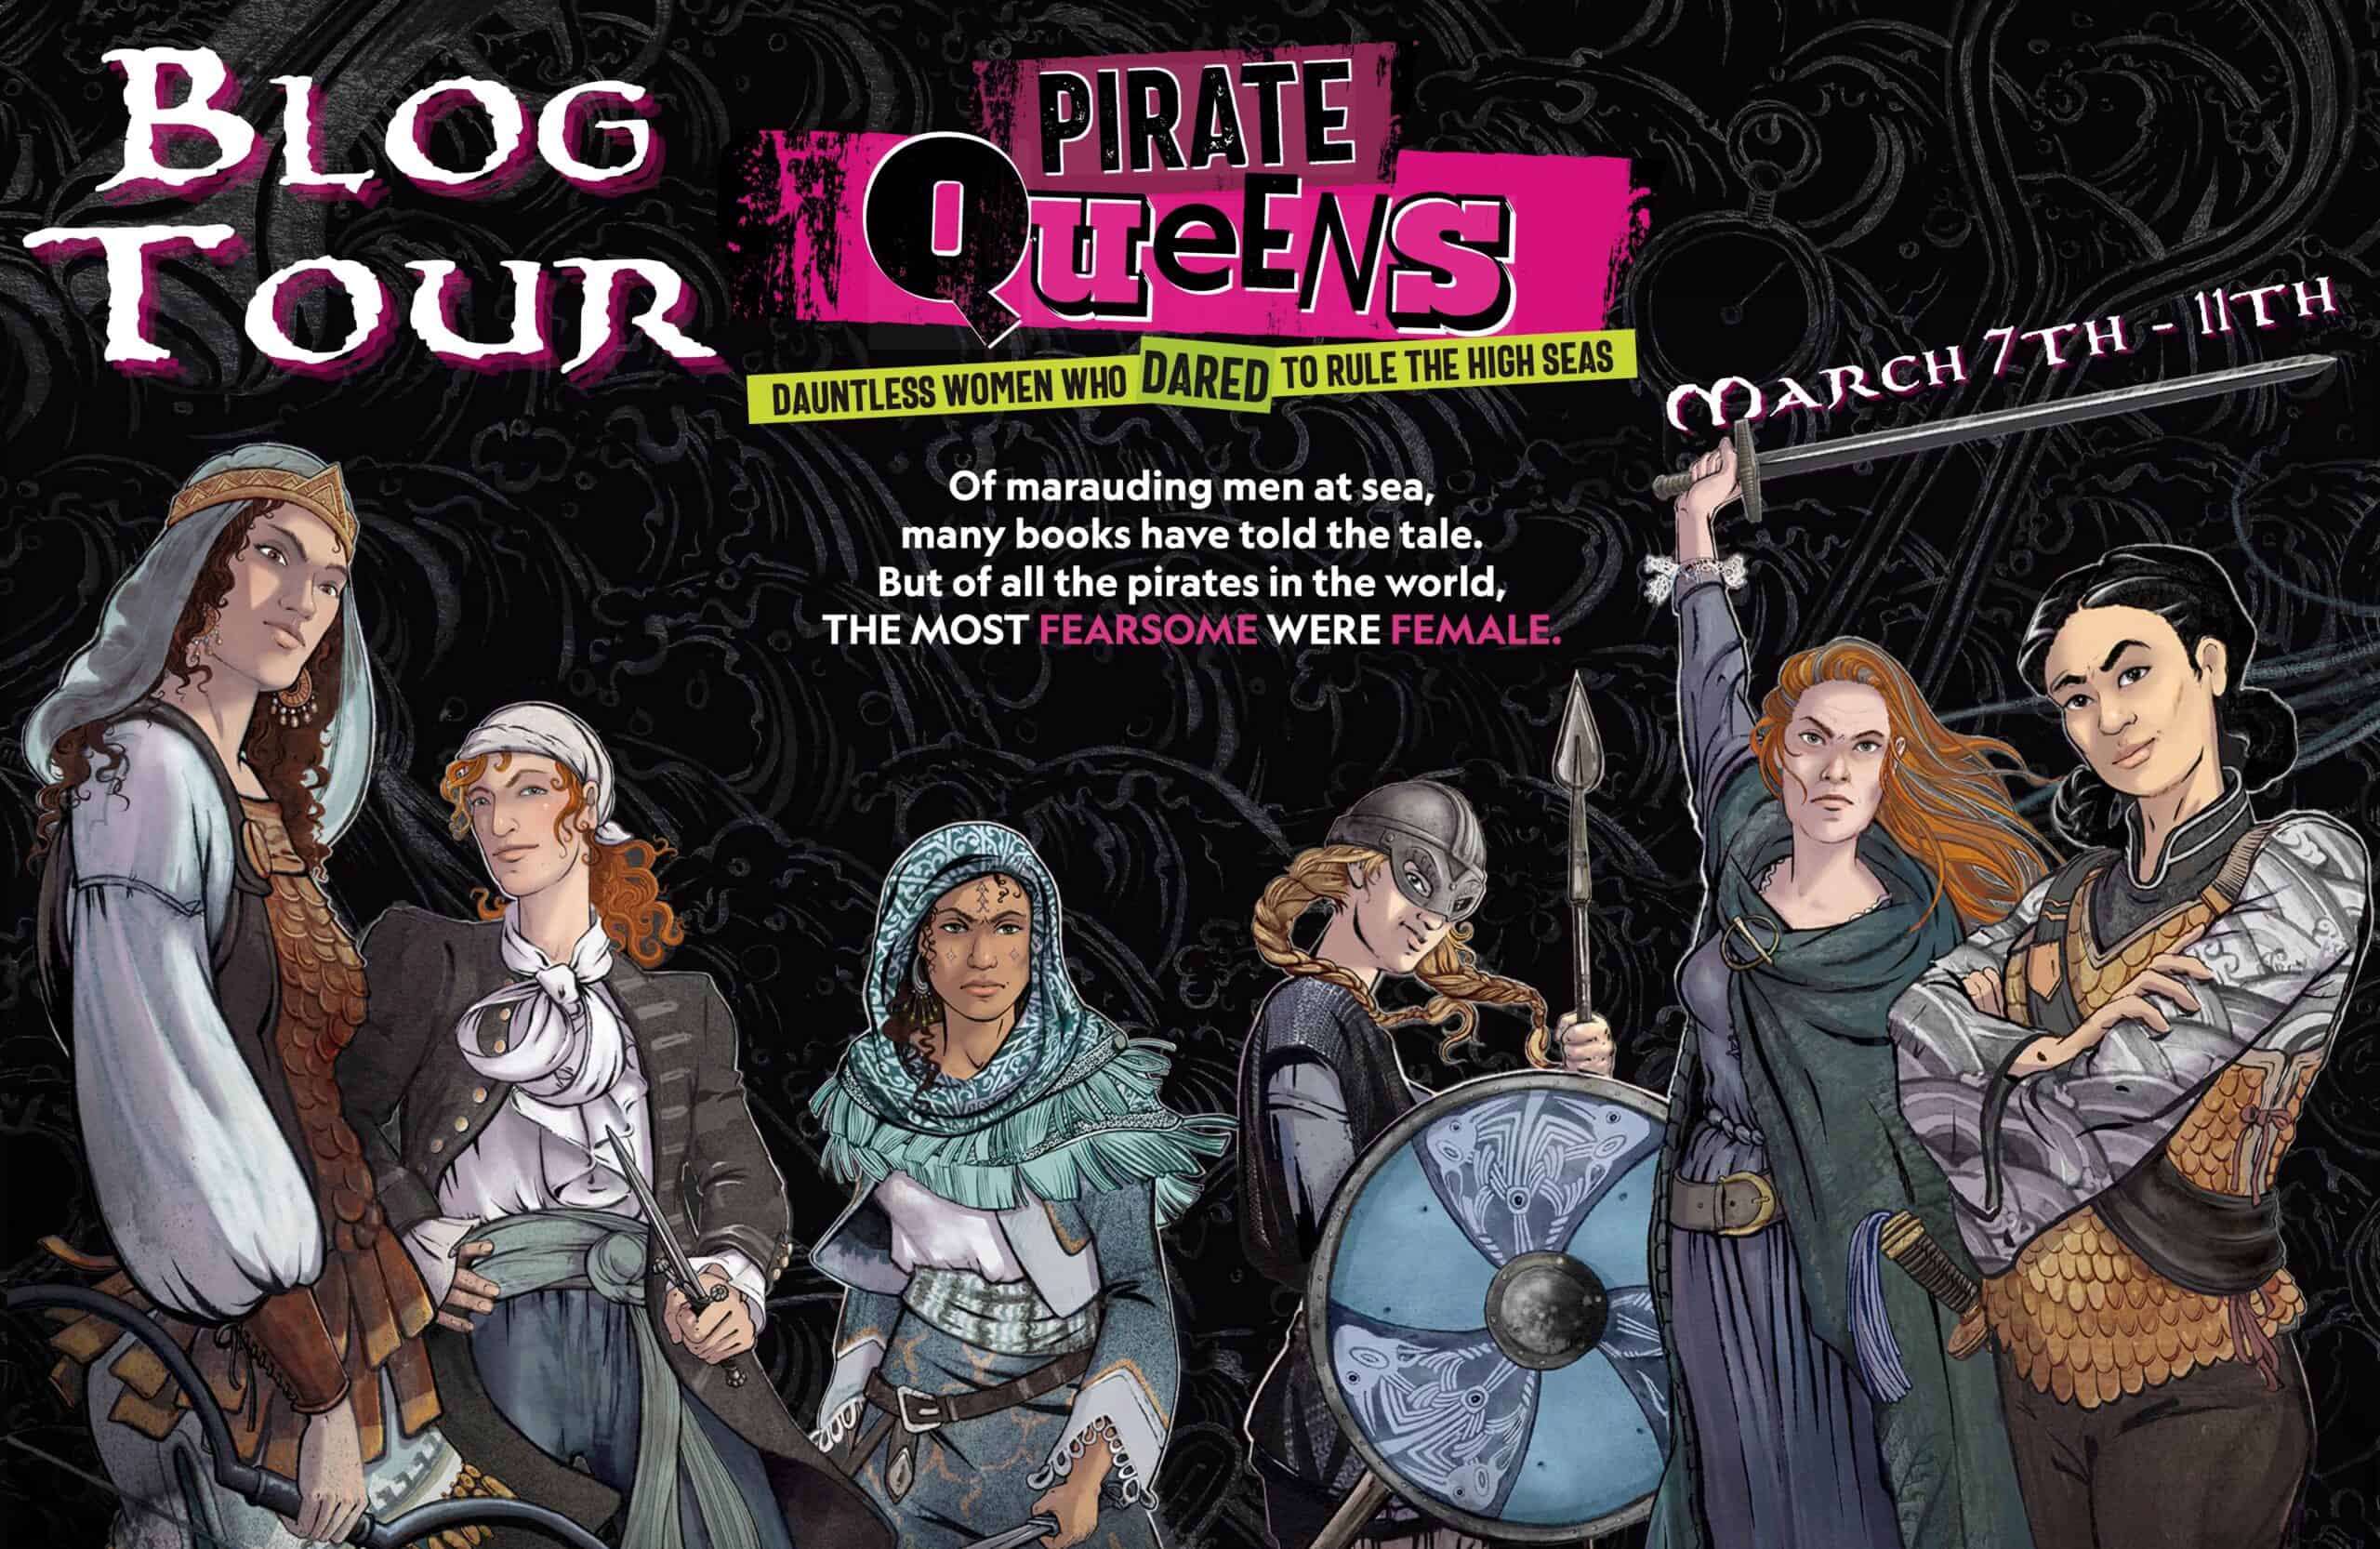 Kill Your Darlings (Pirate Queens Book Tour)